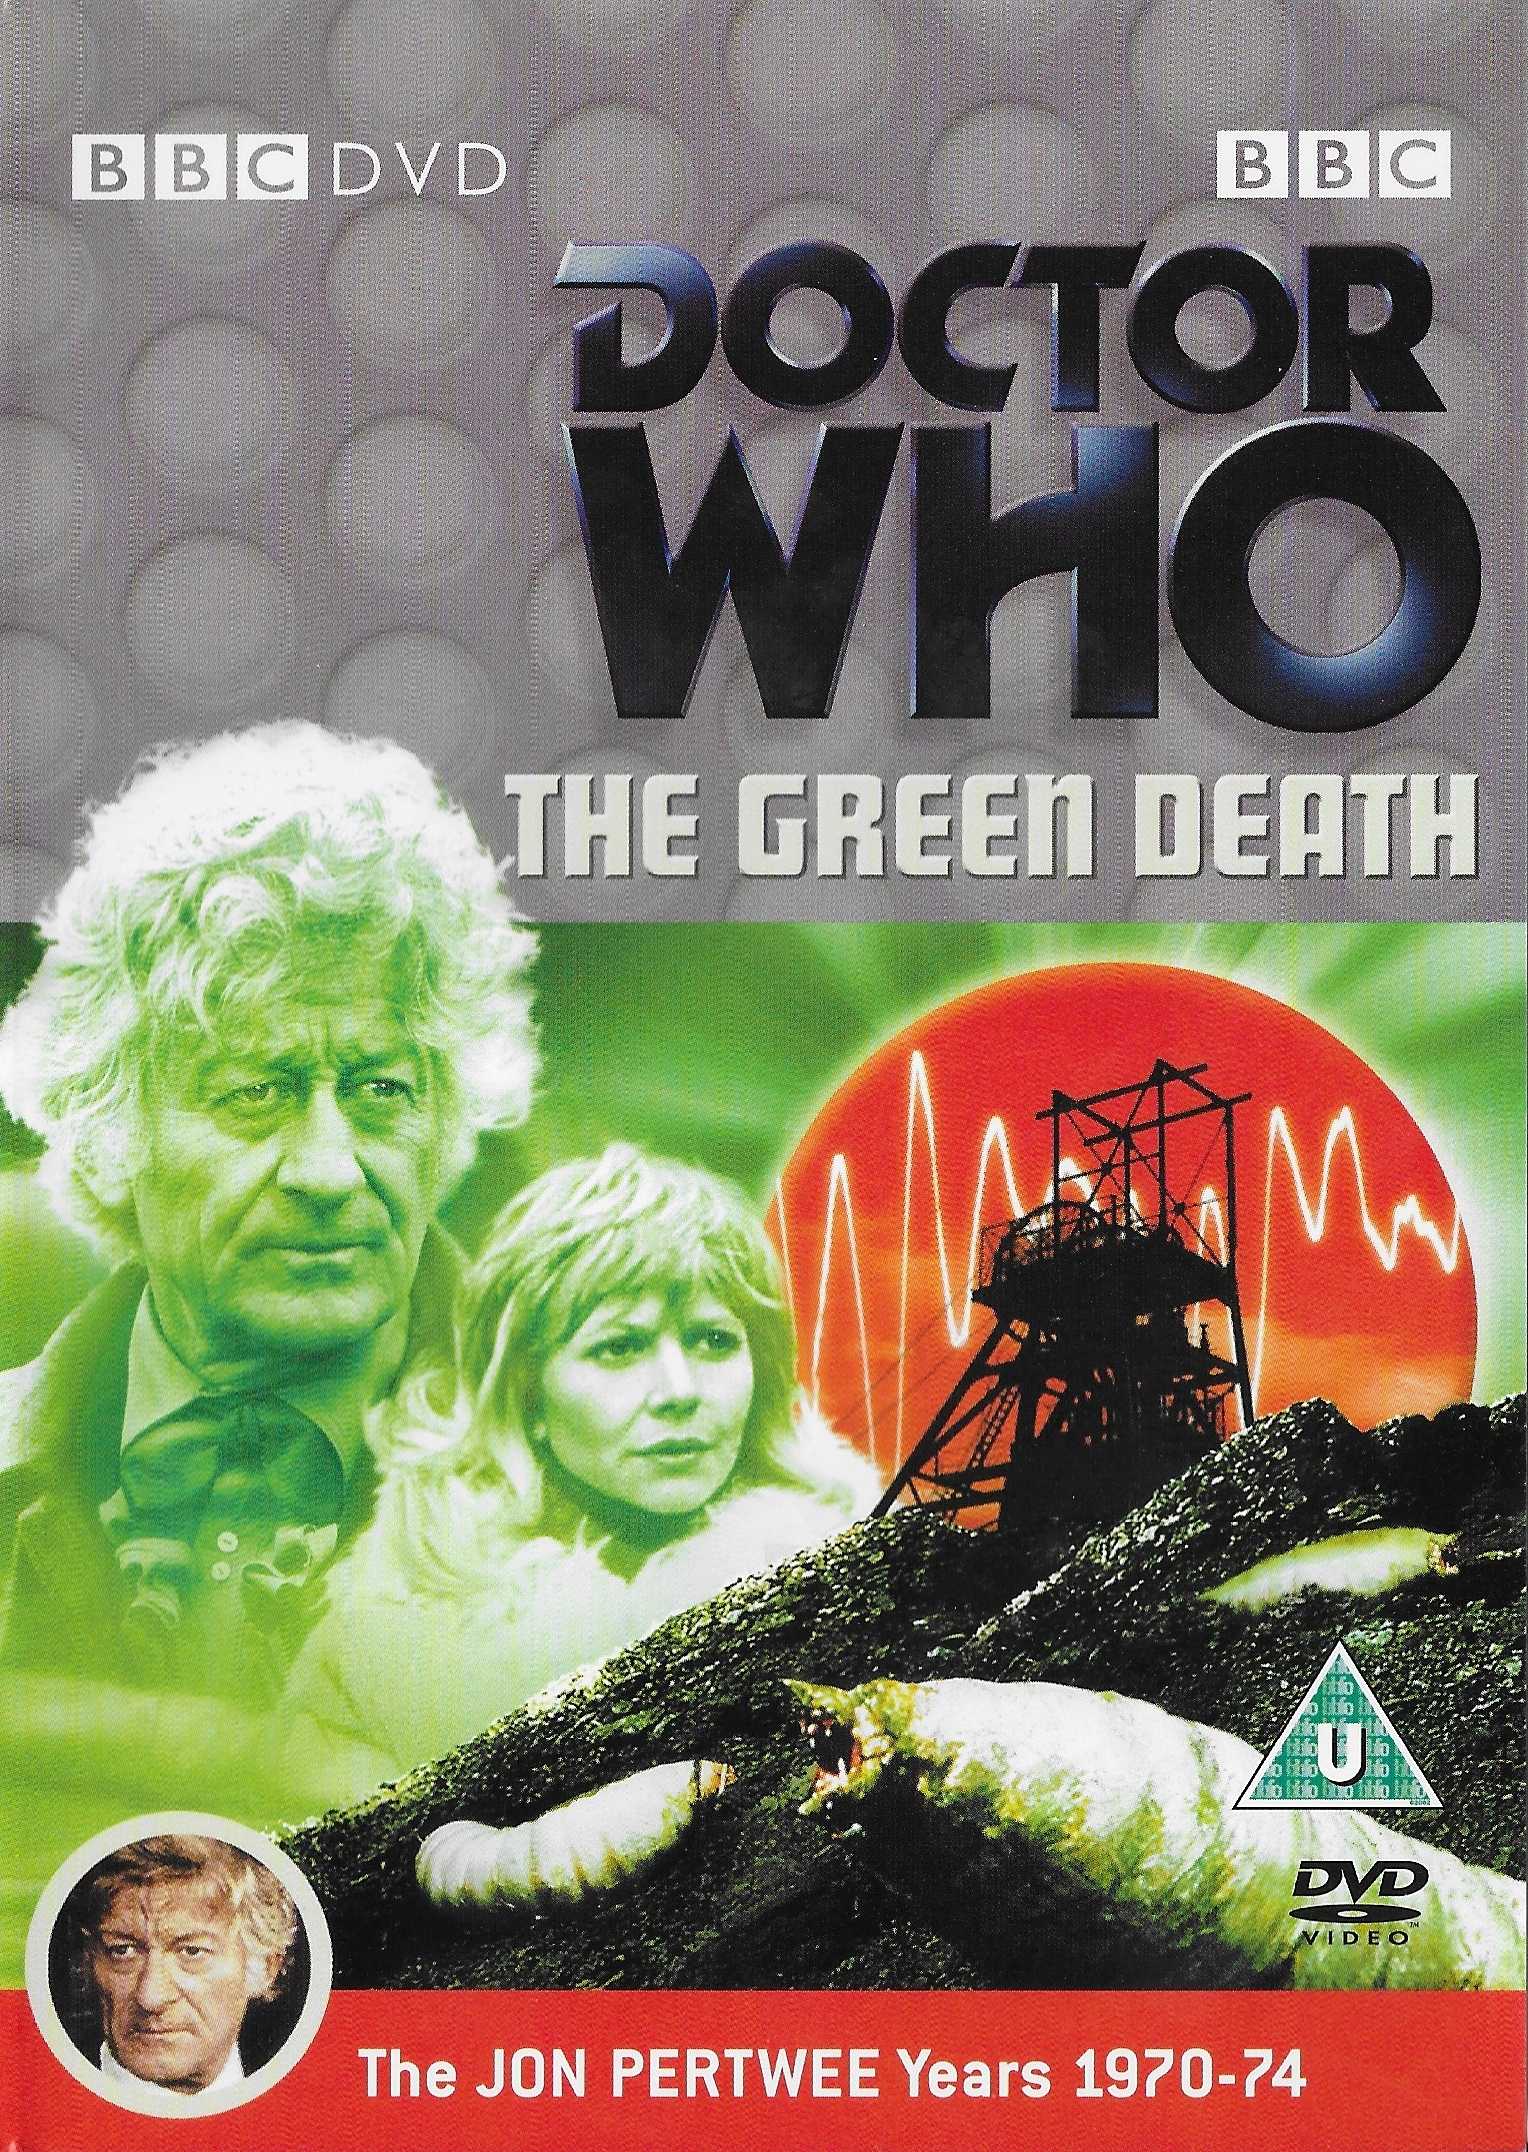 Picture of BBCDVD 1142 Doctor Who - The green death by artist Robert Sloman from the BBC dvds - Records and Tapes library